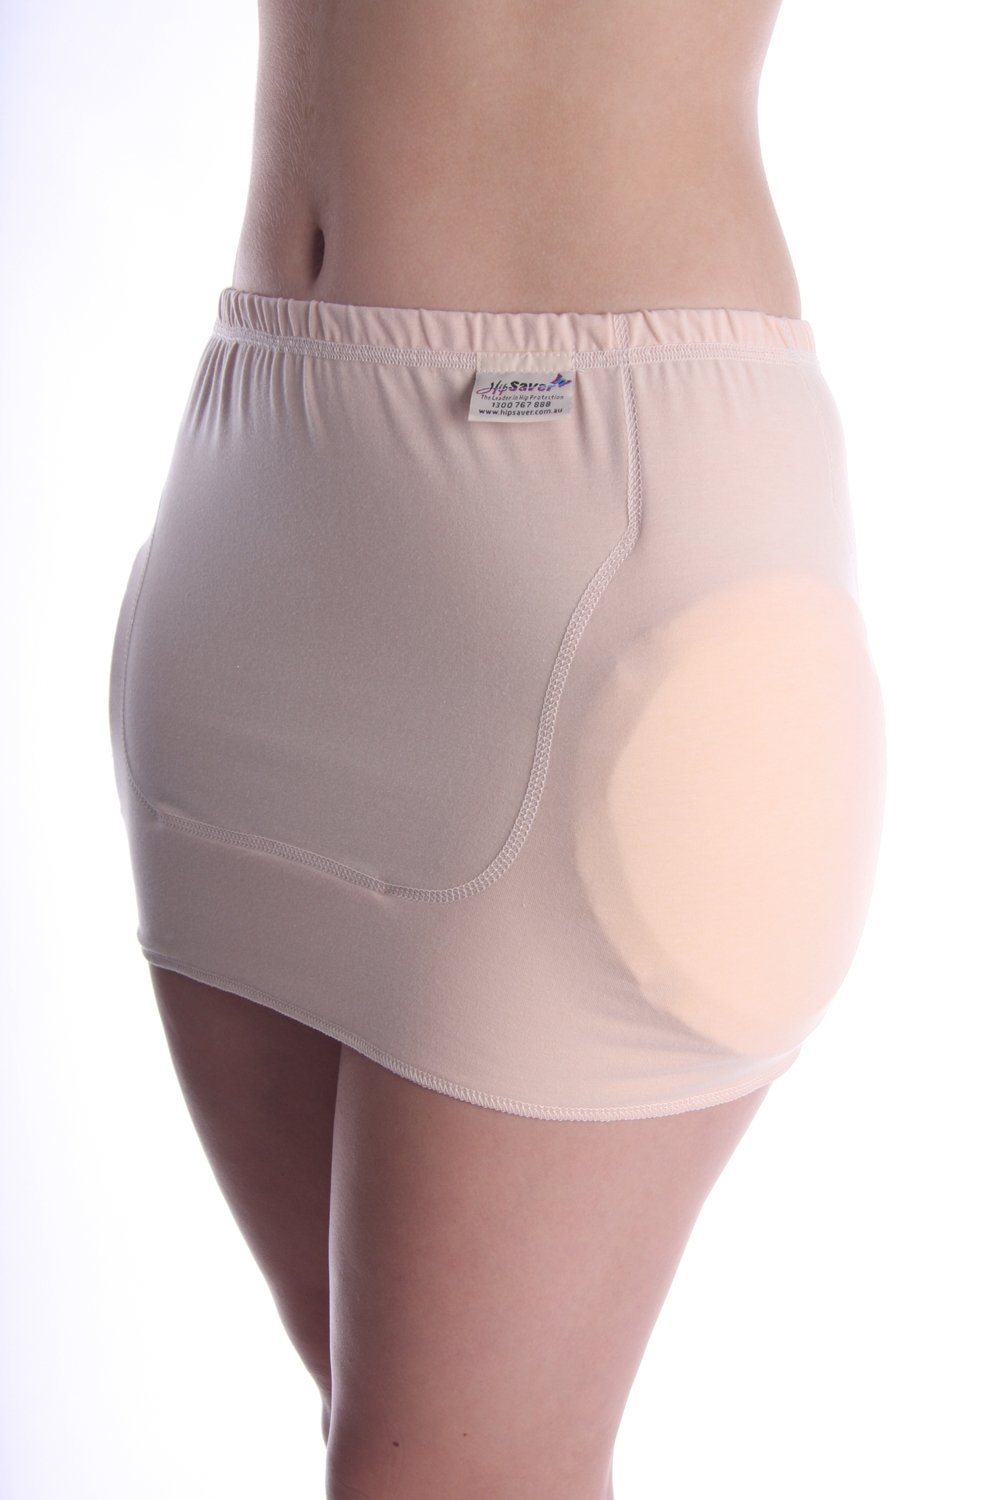 Hipsaver Nursing Home High Compliance With Tailbone Protection Female Large